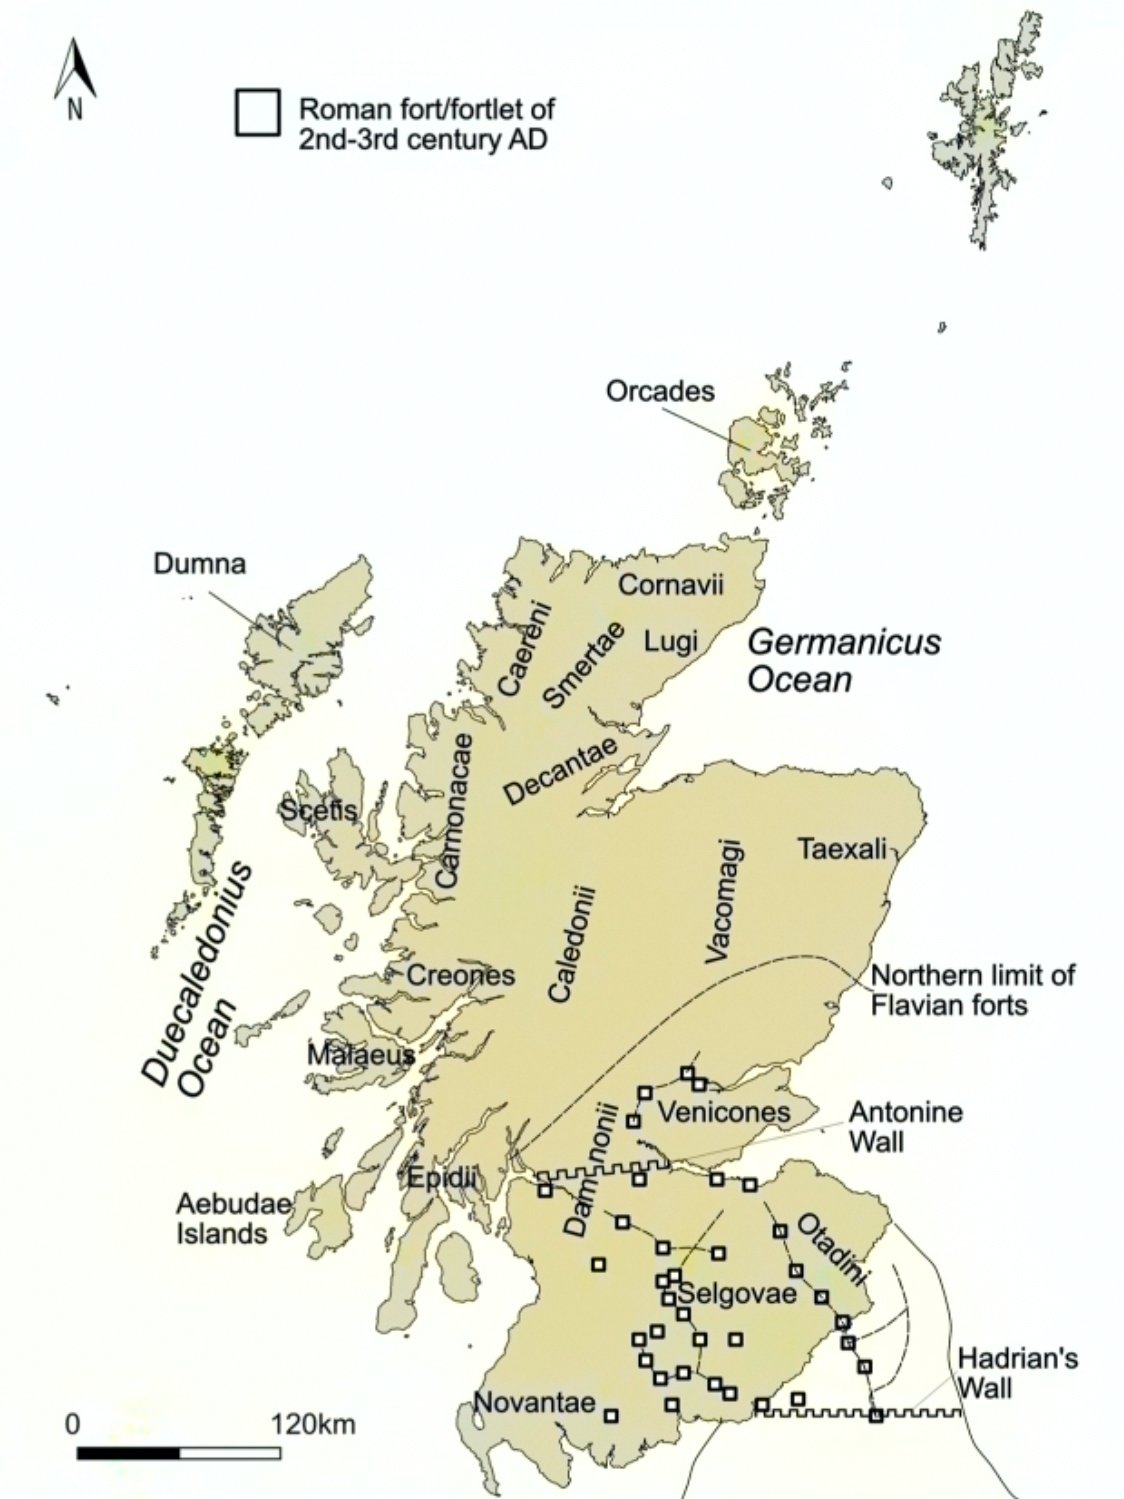 A map of the Roman fort/fortlet of the 2nd-3rd century AD in the area of the Germanicus Ocean (now the North Sea). The map is in black and white with a yellow overlay that shows the locations of the Roman structures, the Northern limit of Flavian Wall, and Hadrian’s Wall. The map also shows the names and locations of the different tribes that lived in the area at the time, such as the Coriavii, the Venicones, and the Creones. The map has a scale of 0-120km and a compass rose in the top left corner.